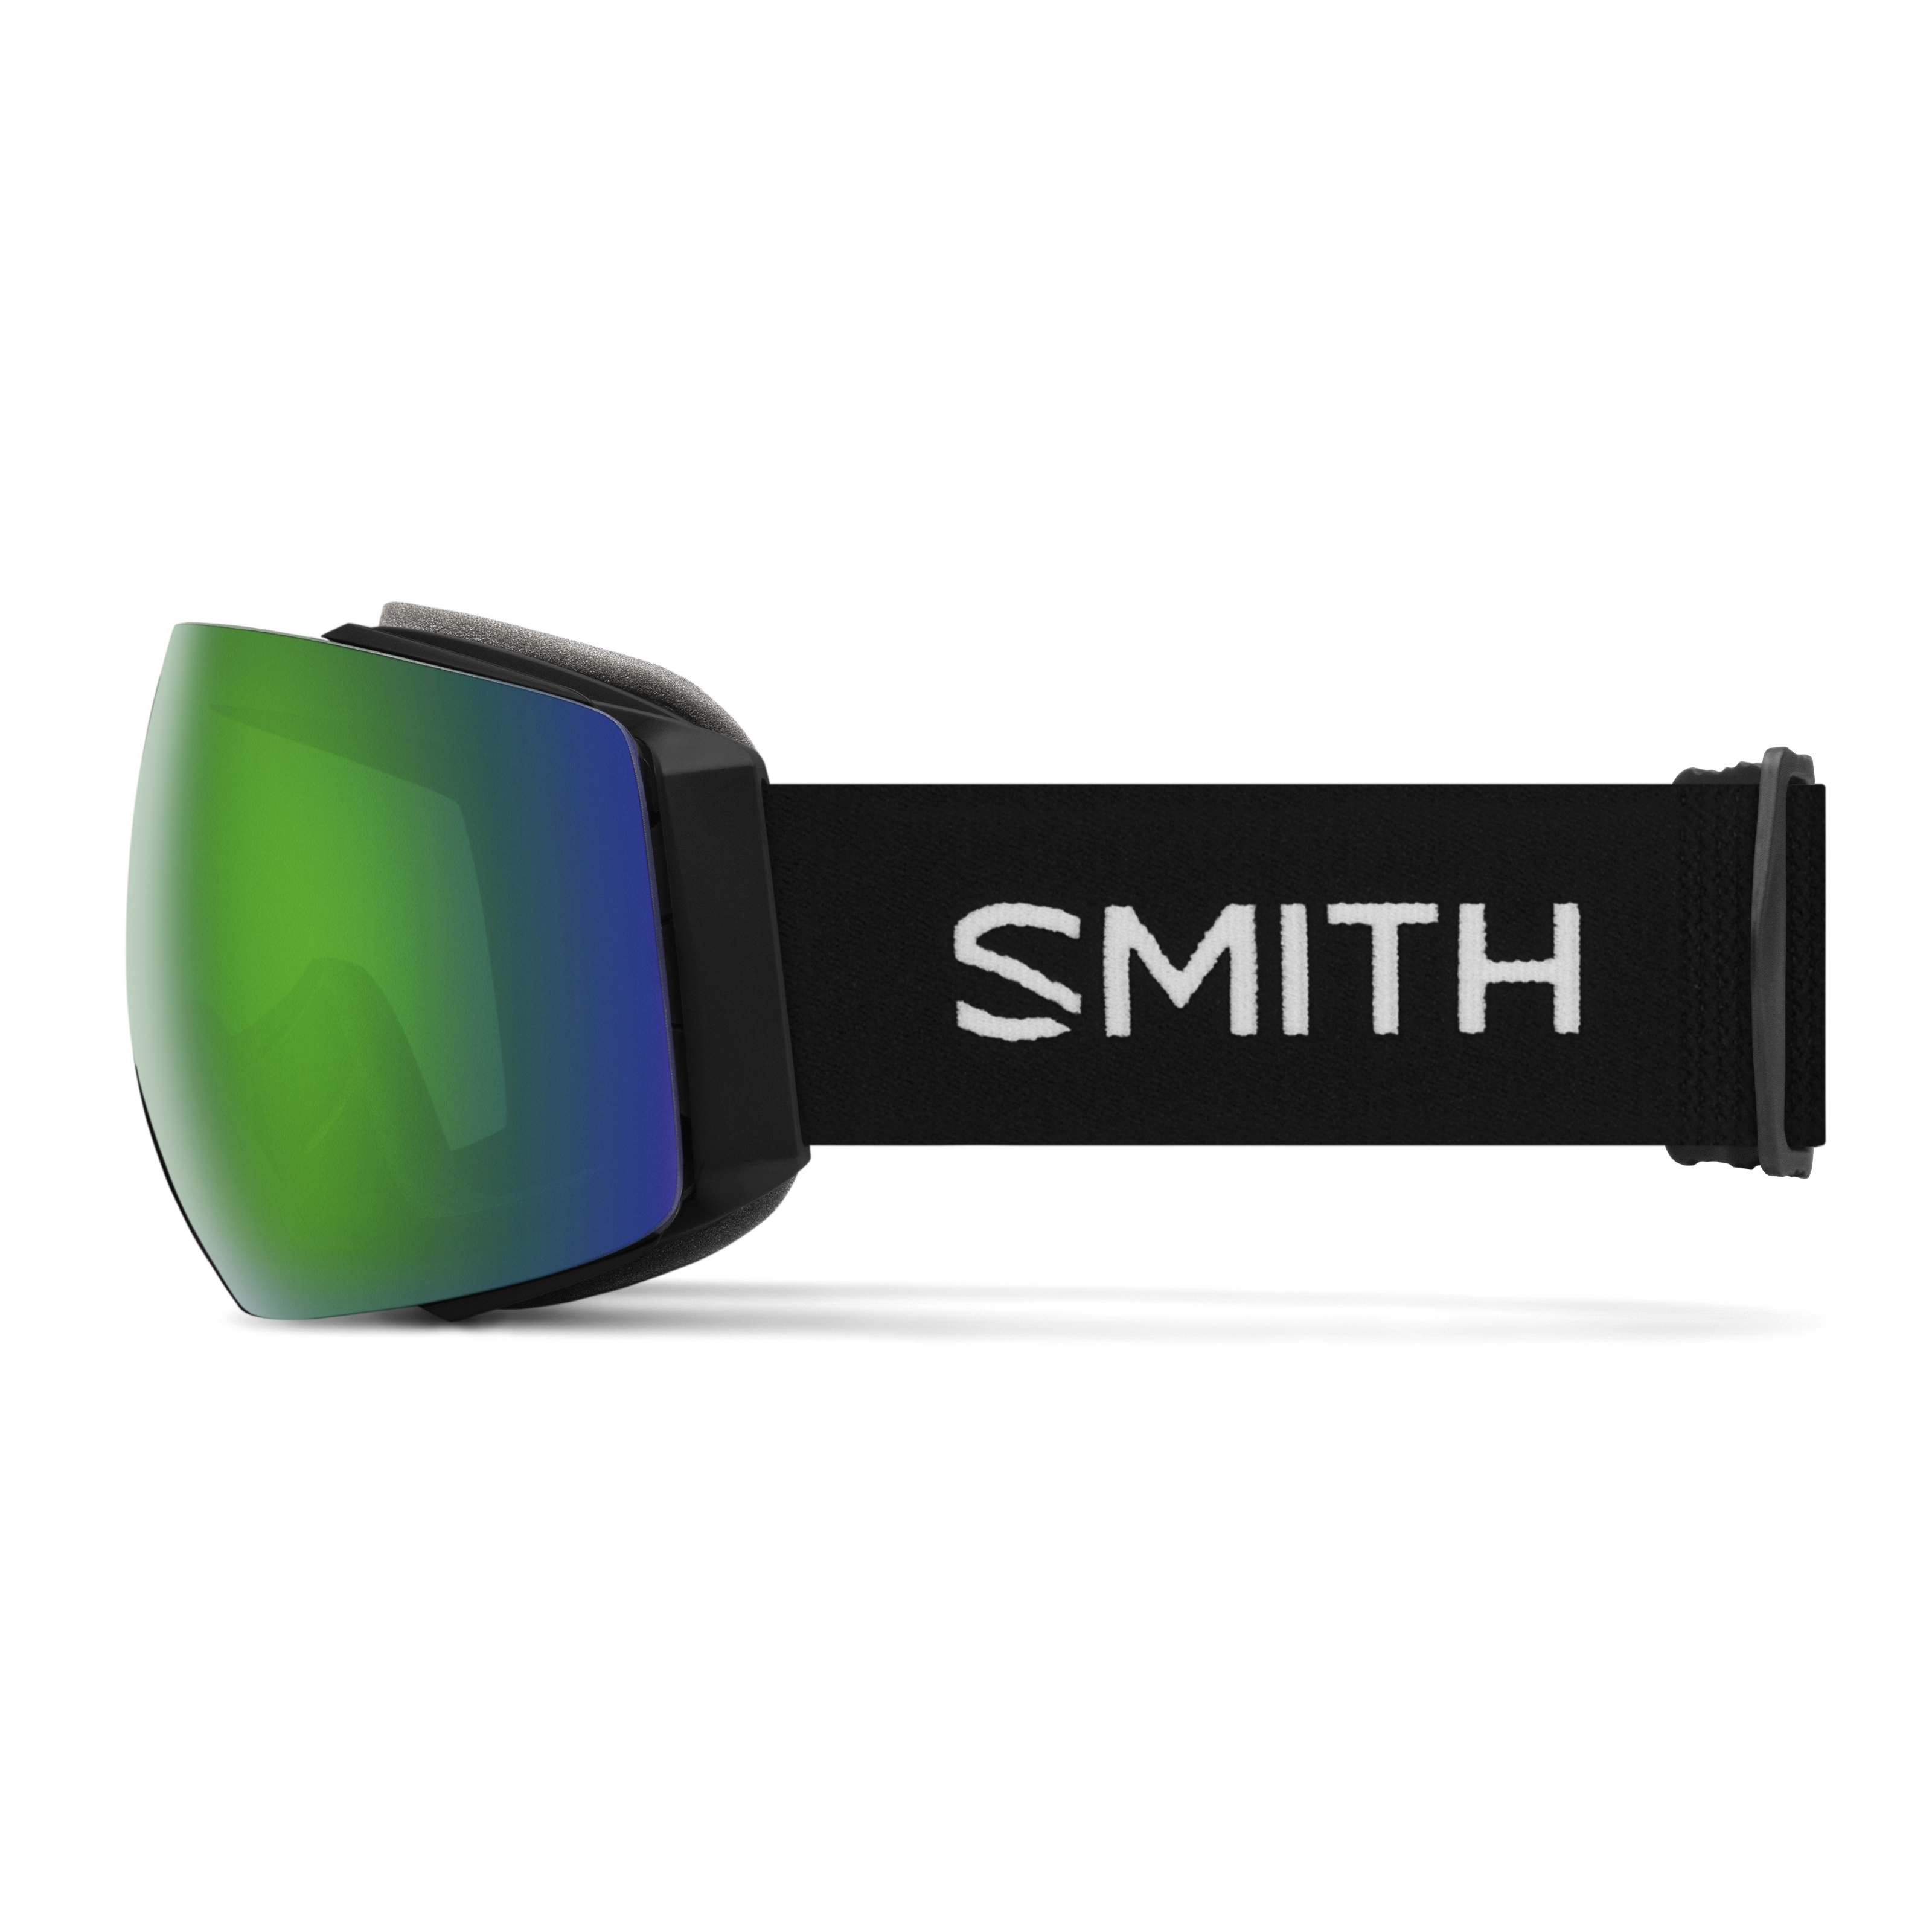 Smith IO MAG goggles in Black/Sun Green. Blue and green lenses, swap out to orange lenses. Black adjustable strap.